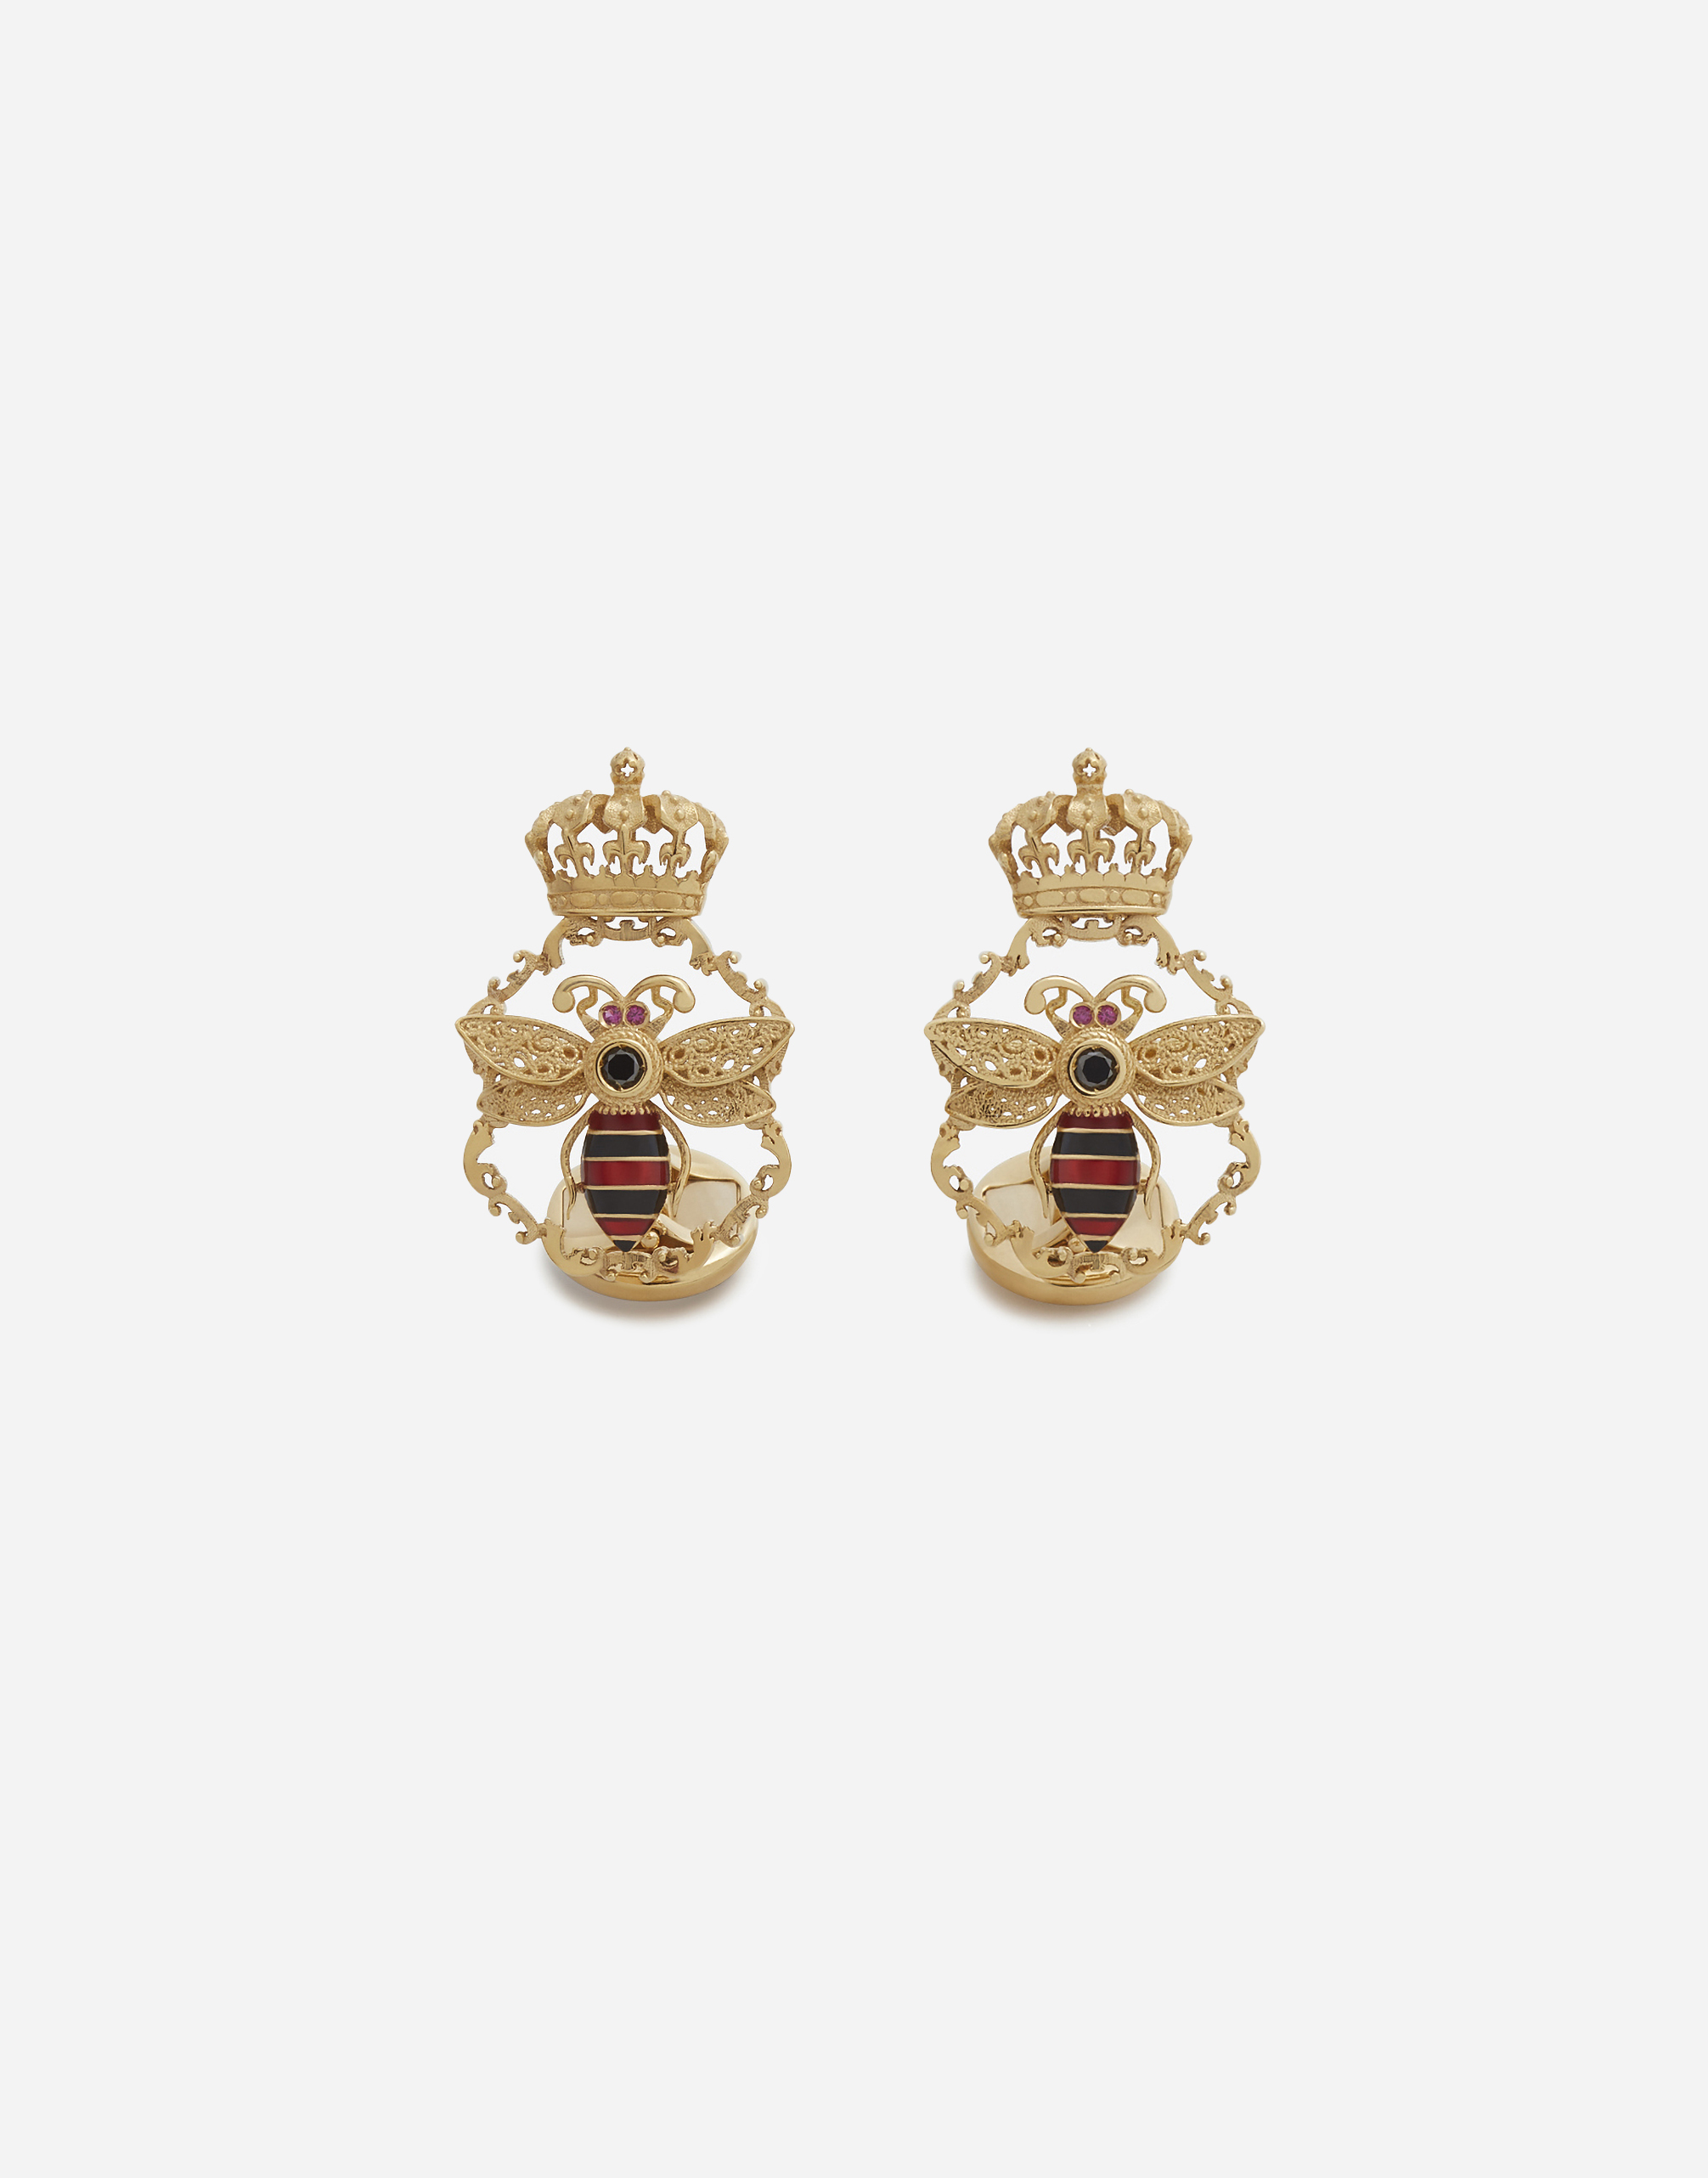 King cufflinks in yellow gold with enamel and black diamonds in Gold